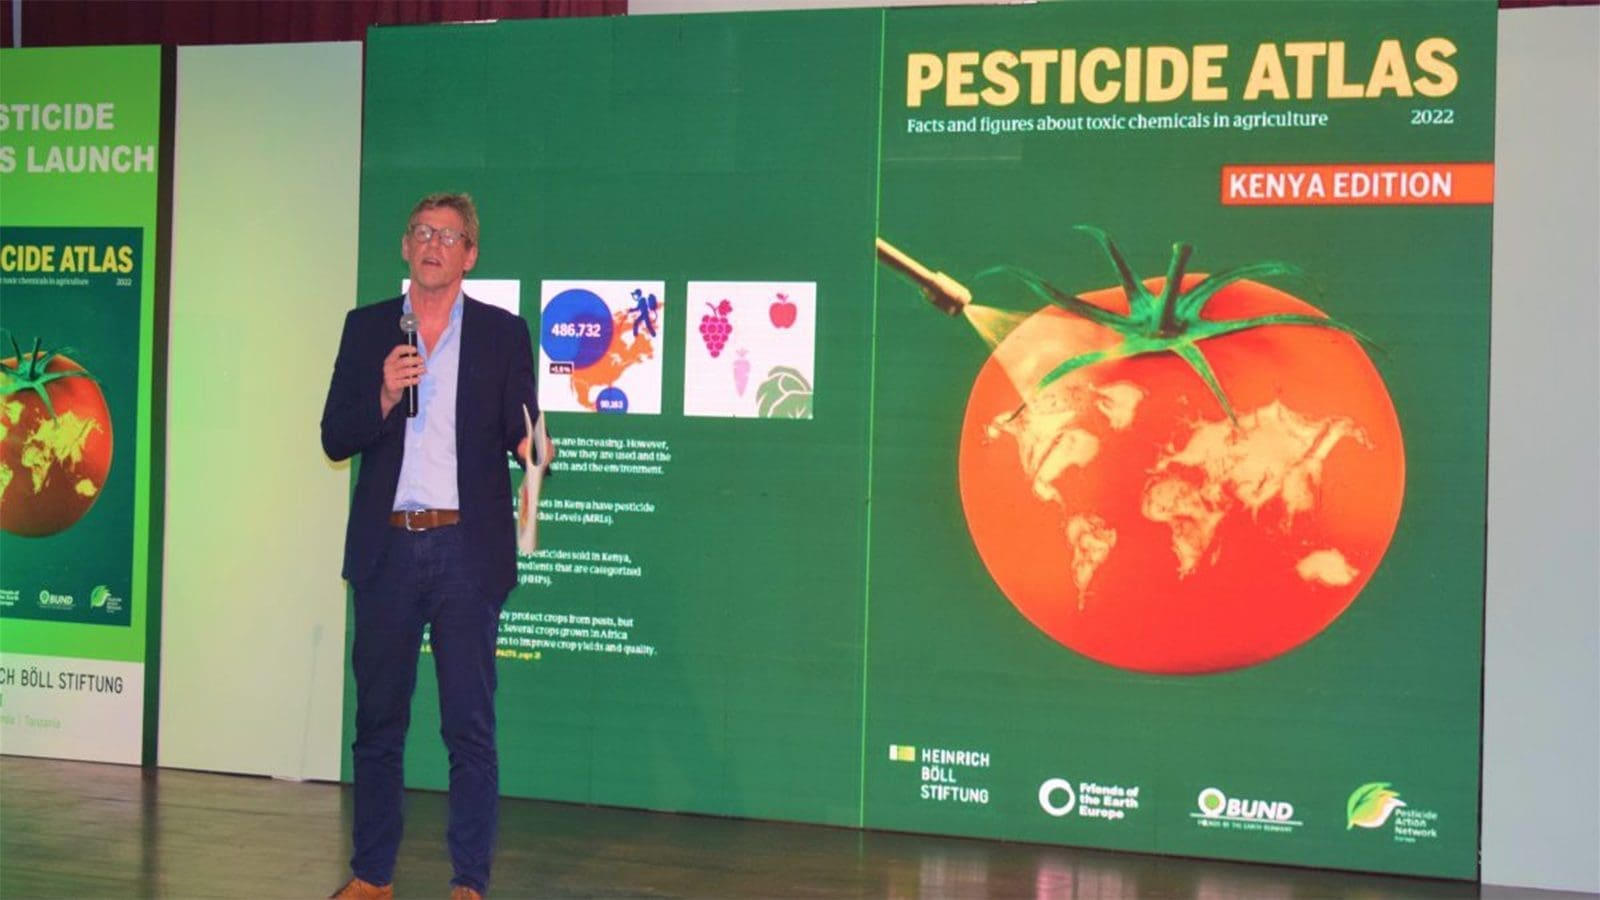 High pesticide residue levels compromise Kenya’s right to safe food, lobby groups voice